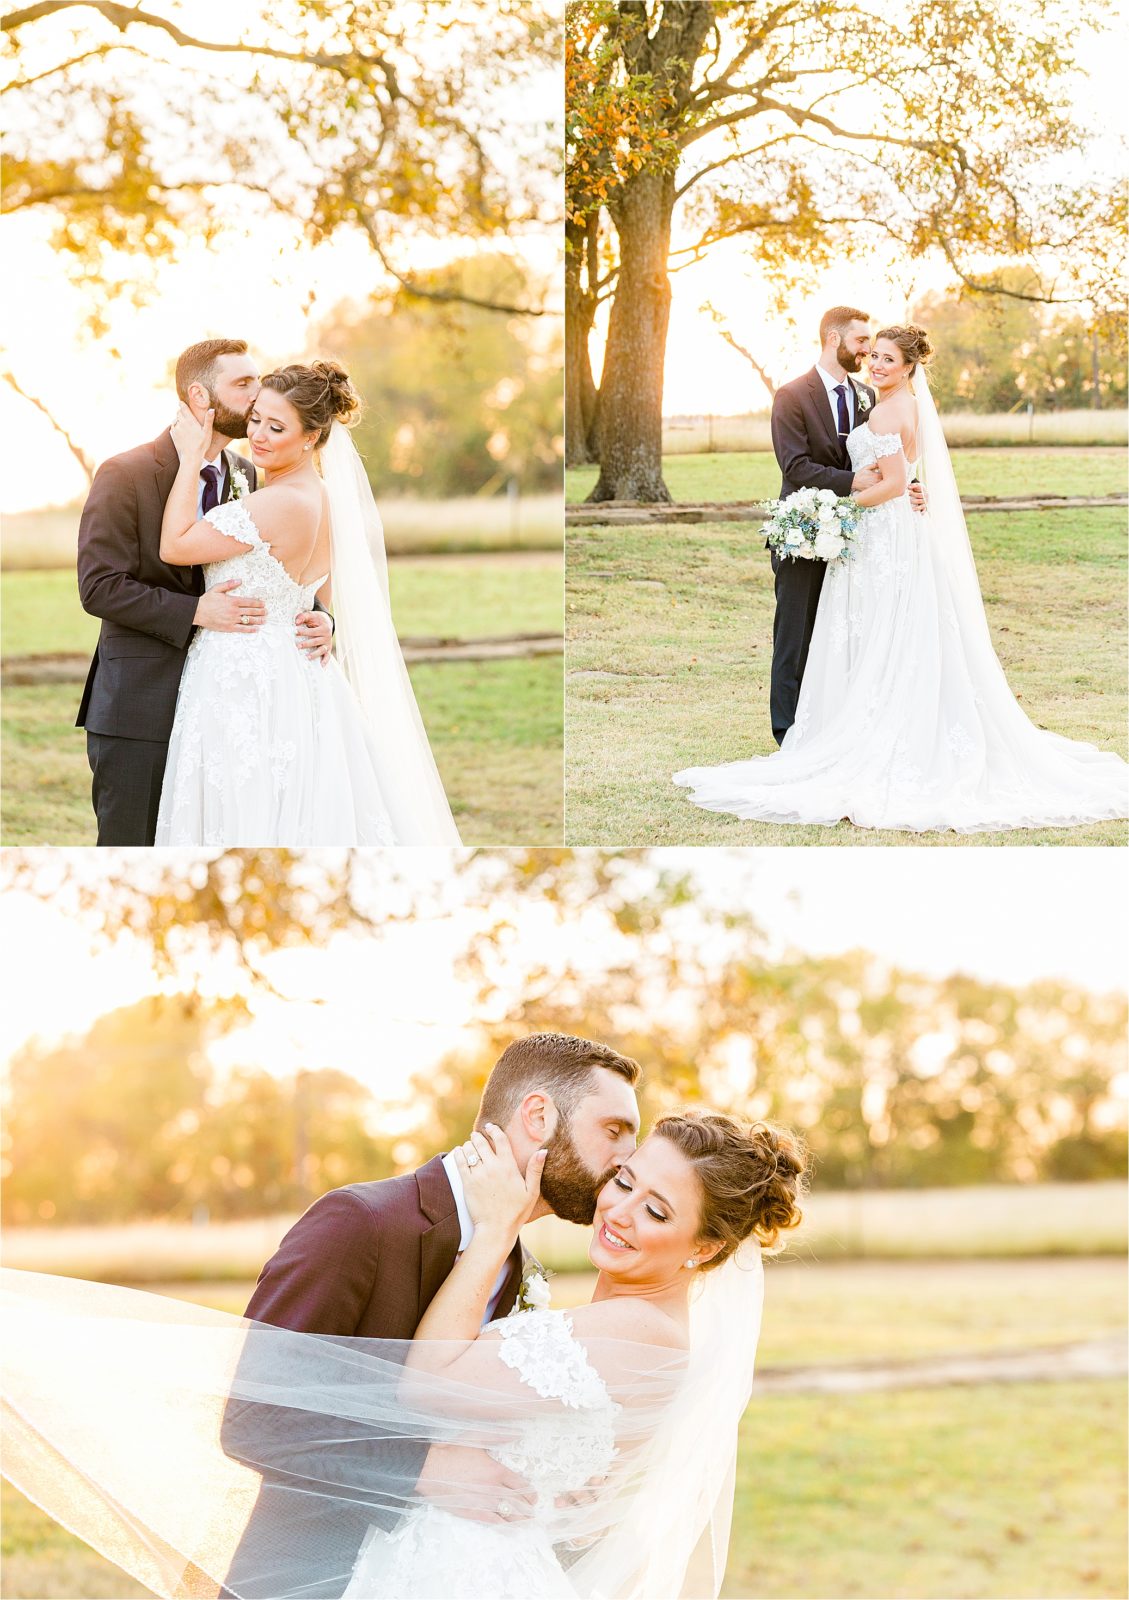 A Groom kisses his bride on her temple as she looks down and her veil swoops in front of them during their Fall, sunset newlywed Portraits at Rustic Grace Estate 